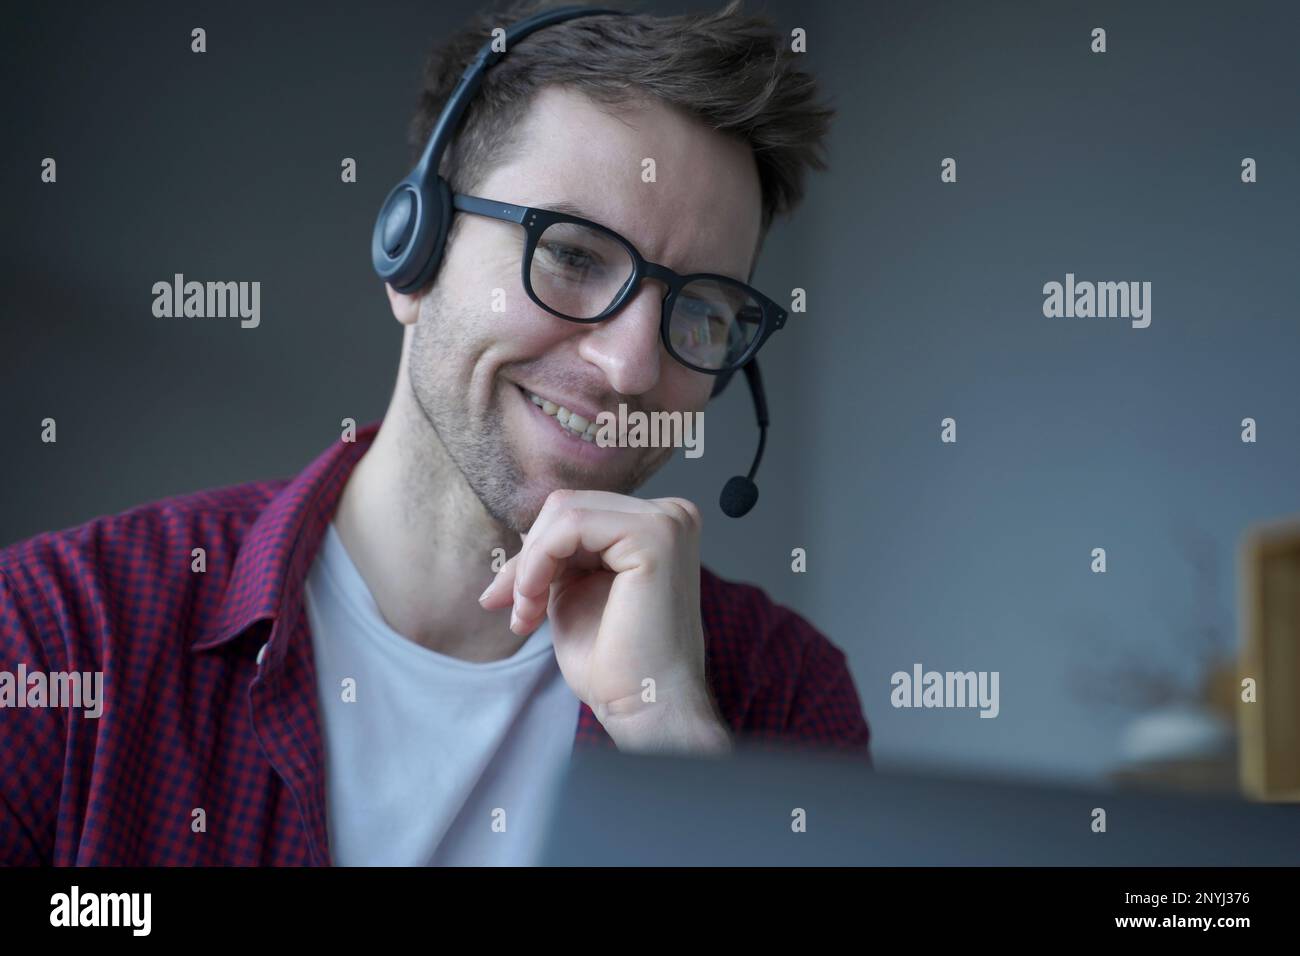 Cheerful man German speaking callcenter consultant in headset with mic works remotely from home, politely smiling while communicates online via laptop Stock Photo